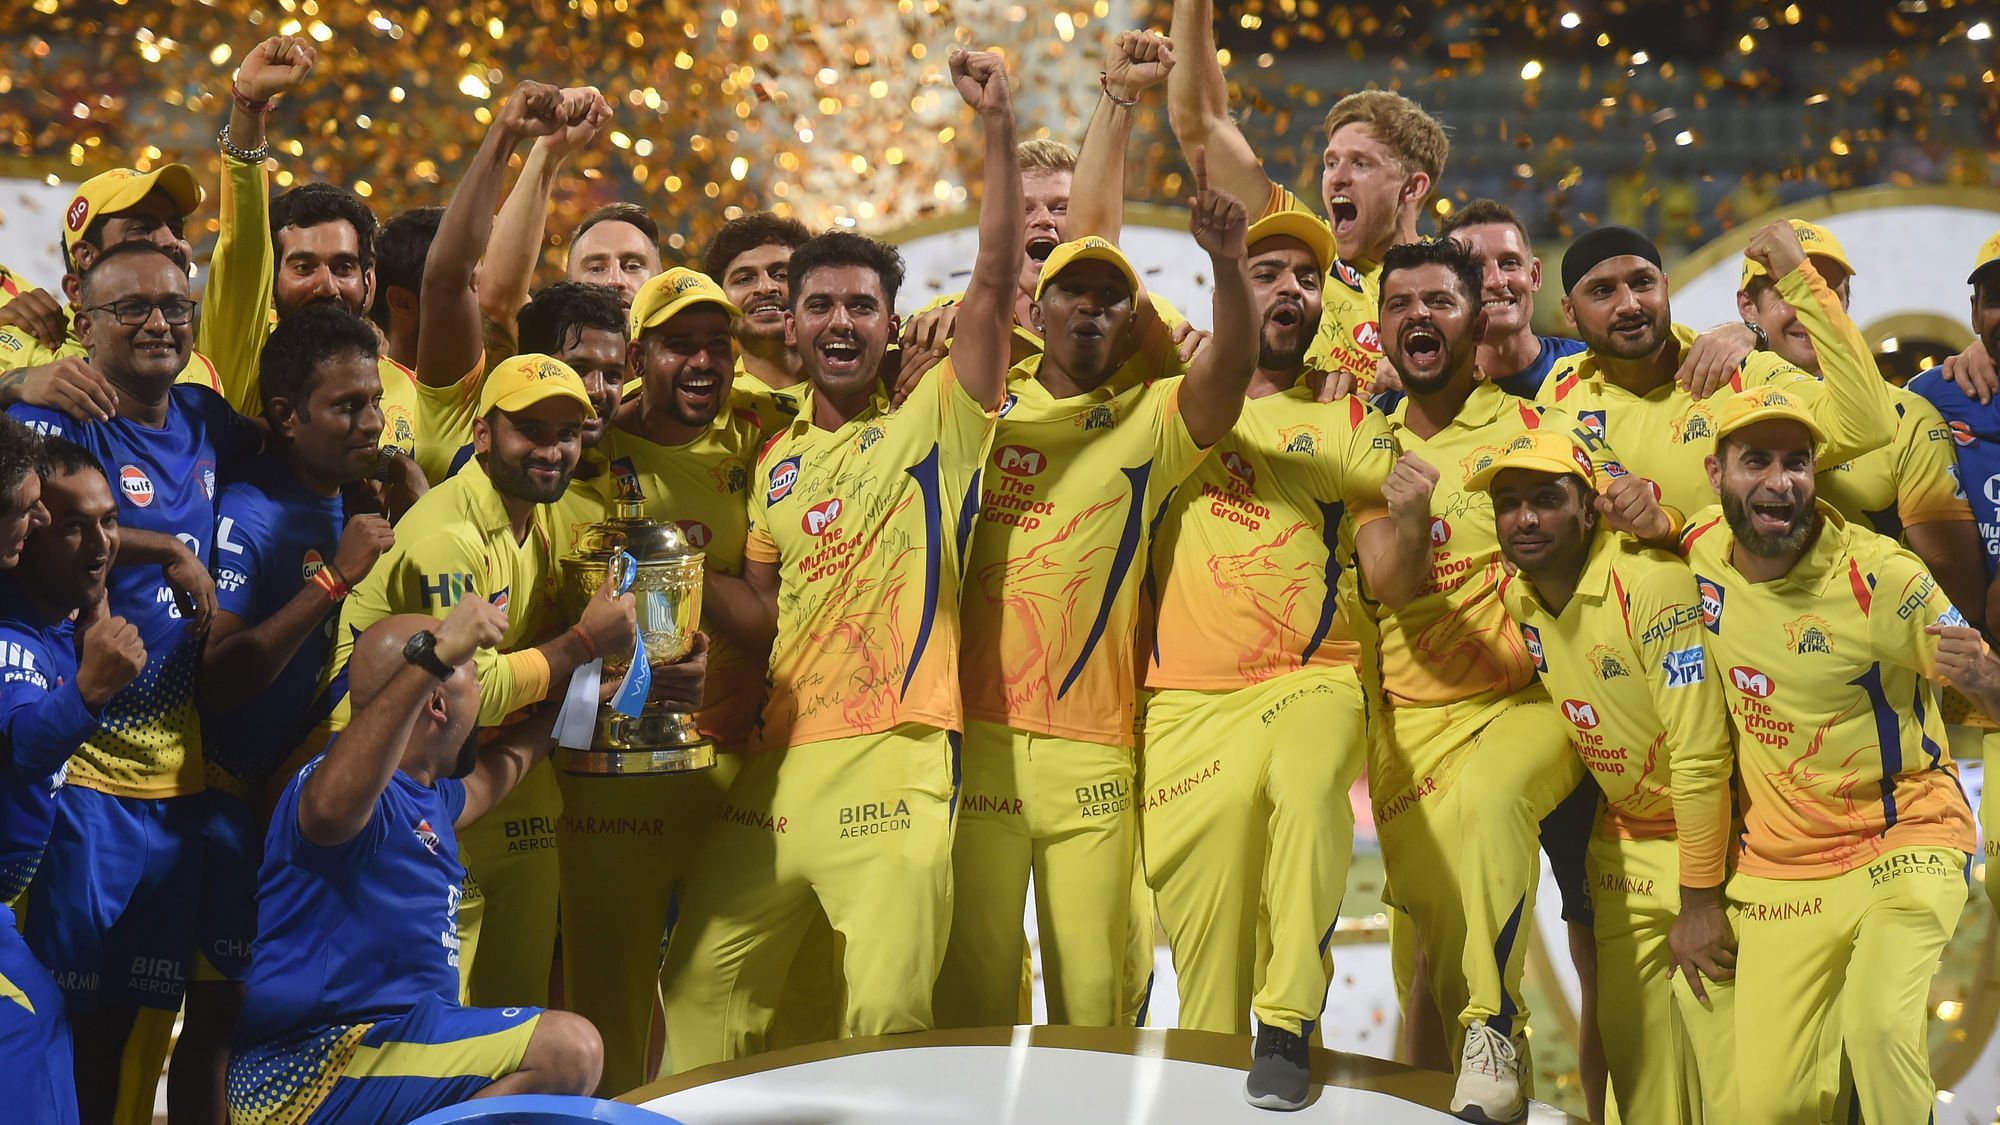 Chennai Super Kings players celebrate with the IPL 2018 trophy after winning the final against Sunrisers Hyderabad in Mumbai on Sunday.